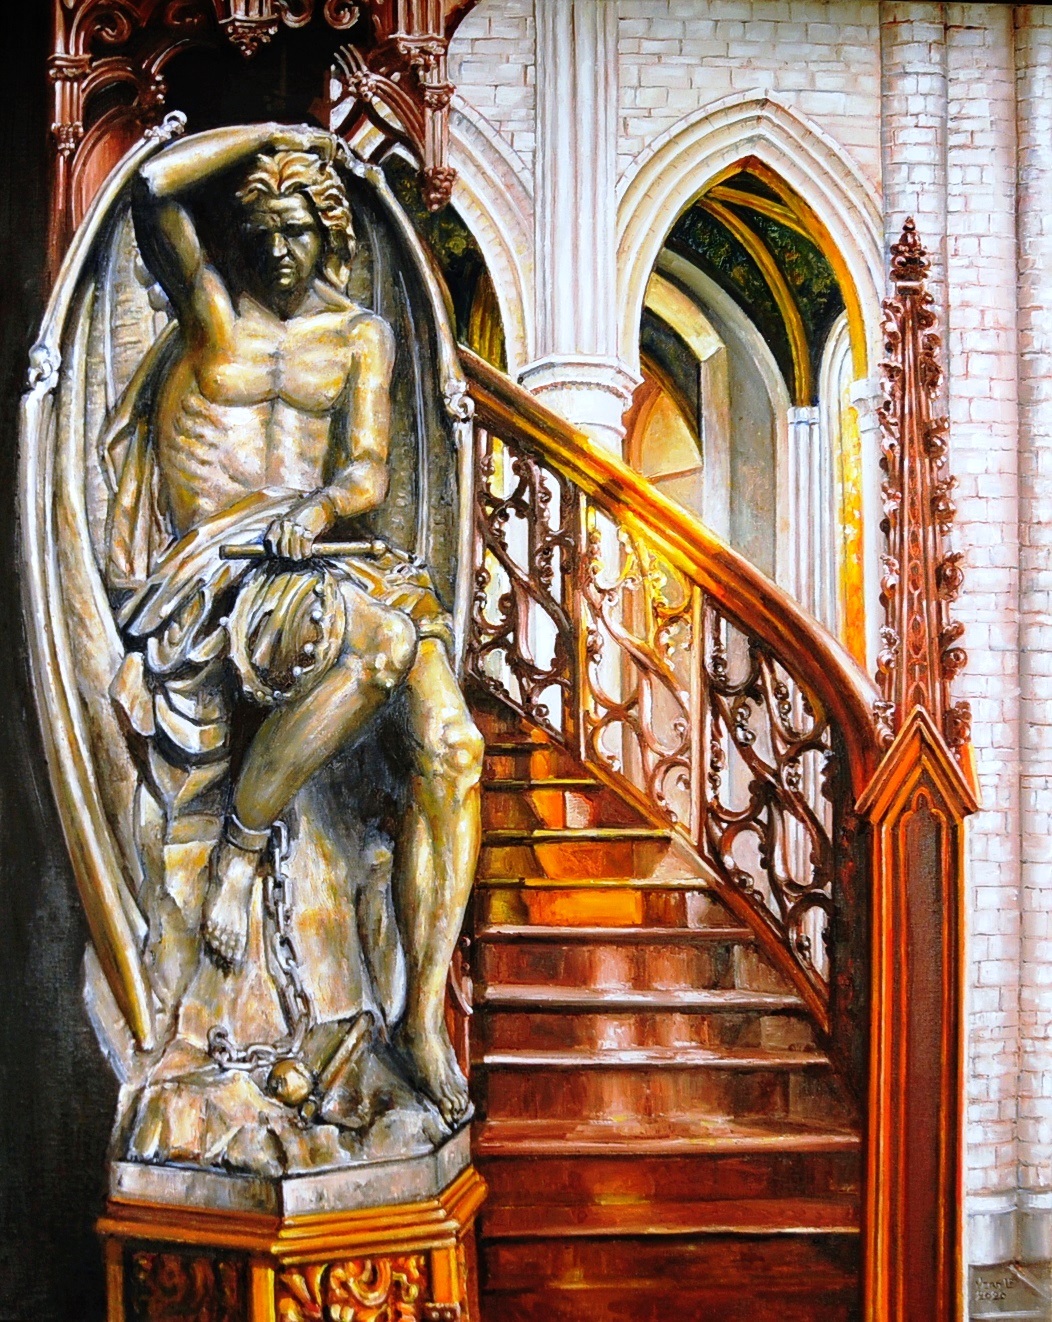 The devil in the church (Liege-Belgium) | Oil paint on linen | Year: 2020 | Dimensions: 100x80cm